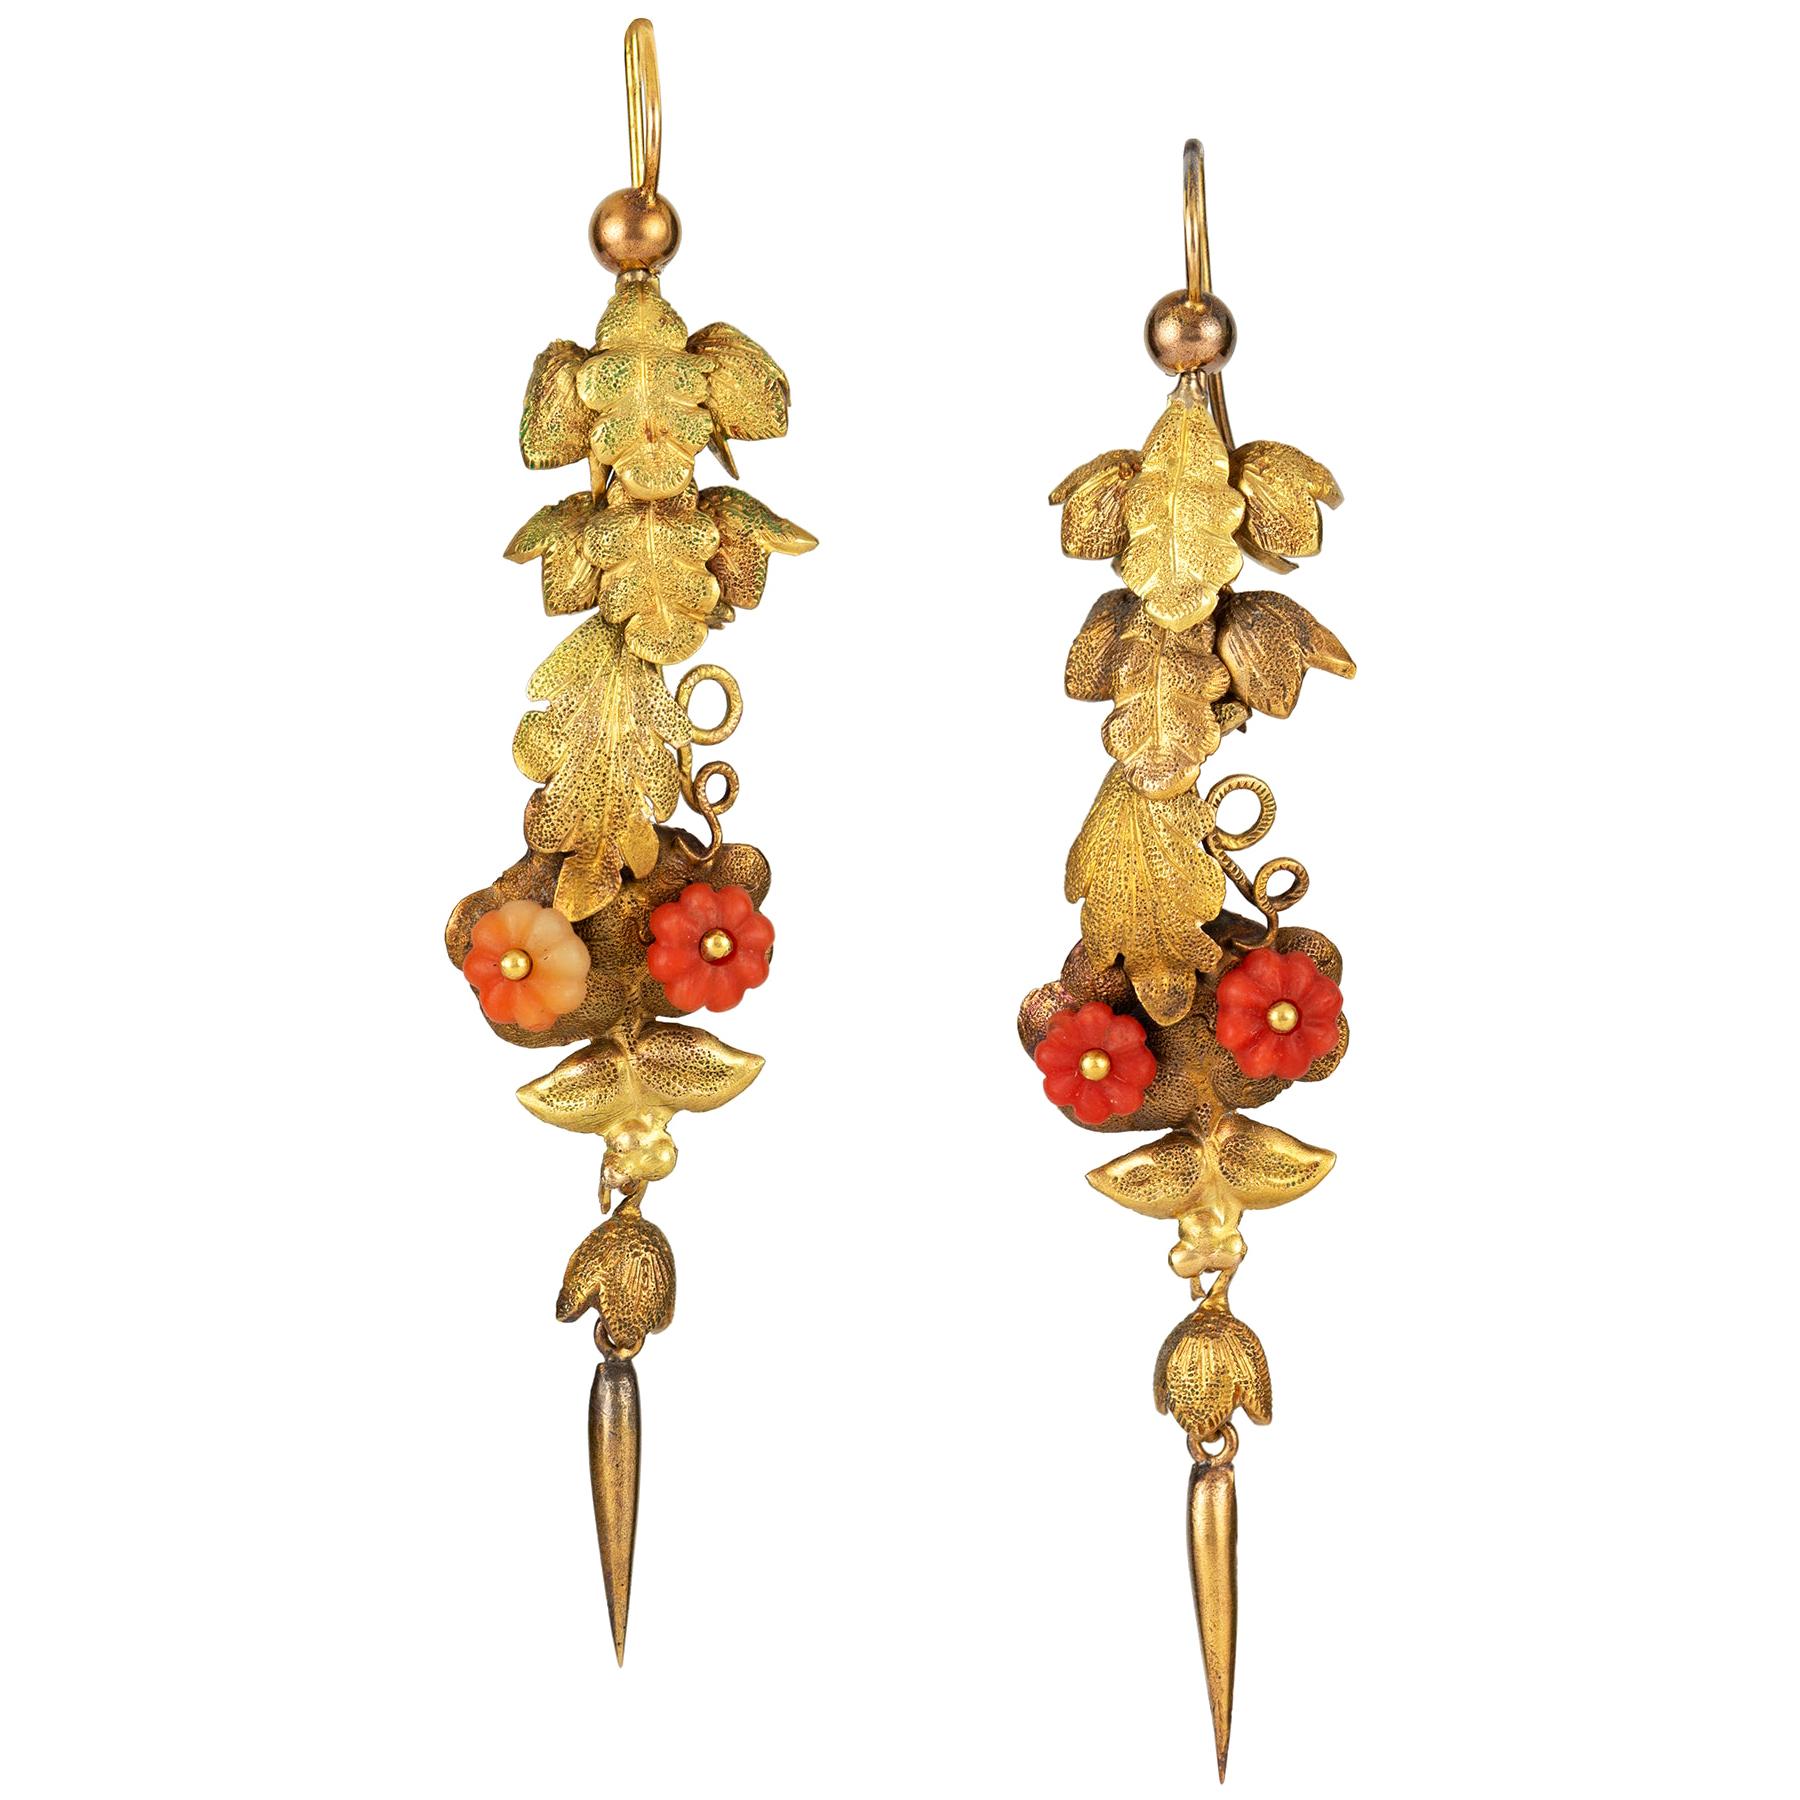 Pair of Early Victorian Gold and Coral Leaf Drop Earrings